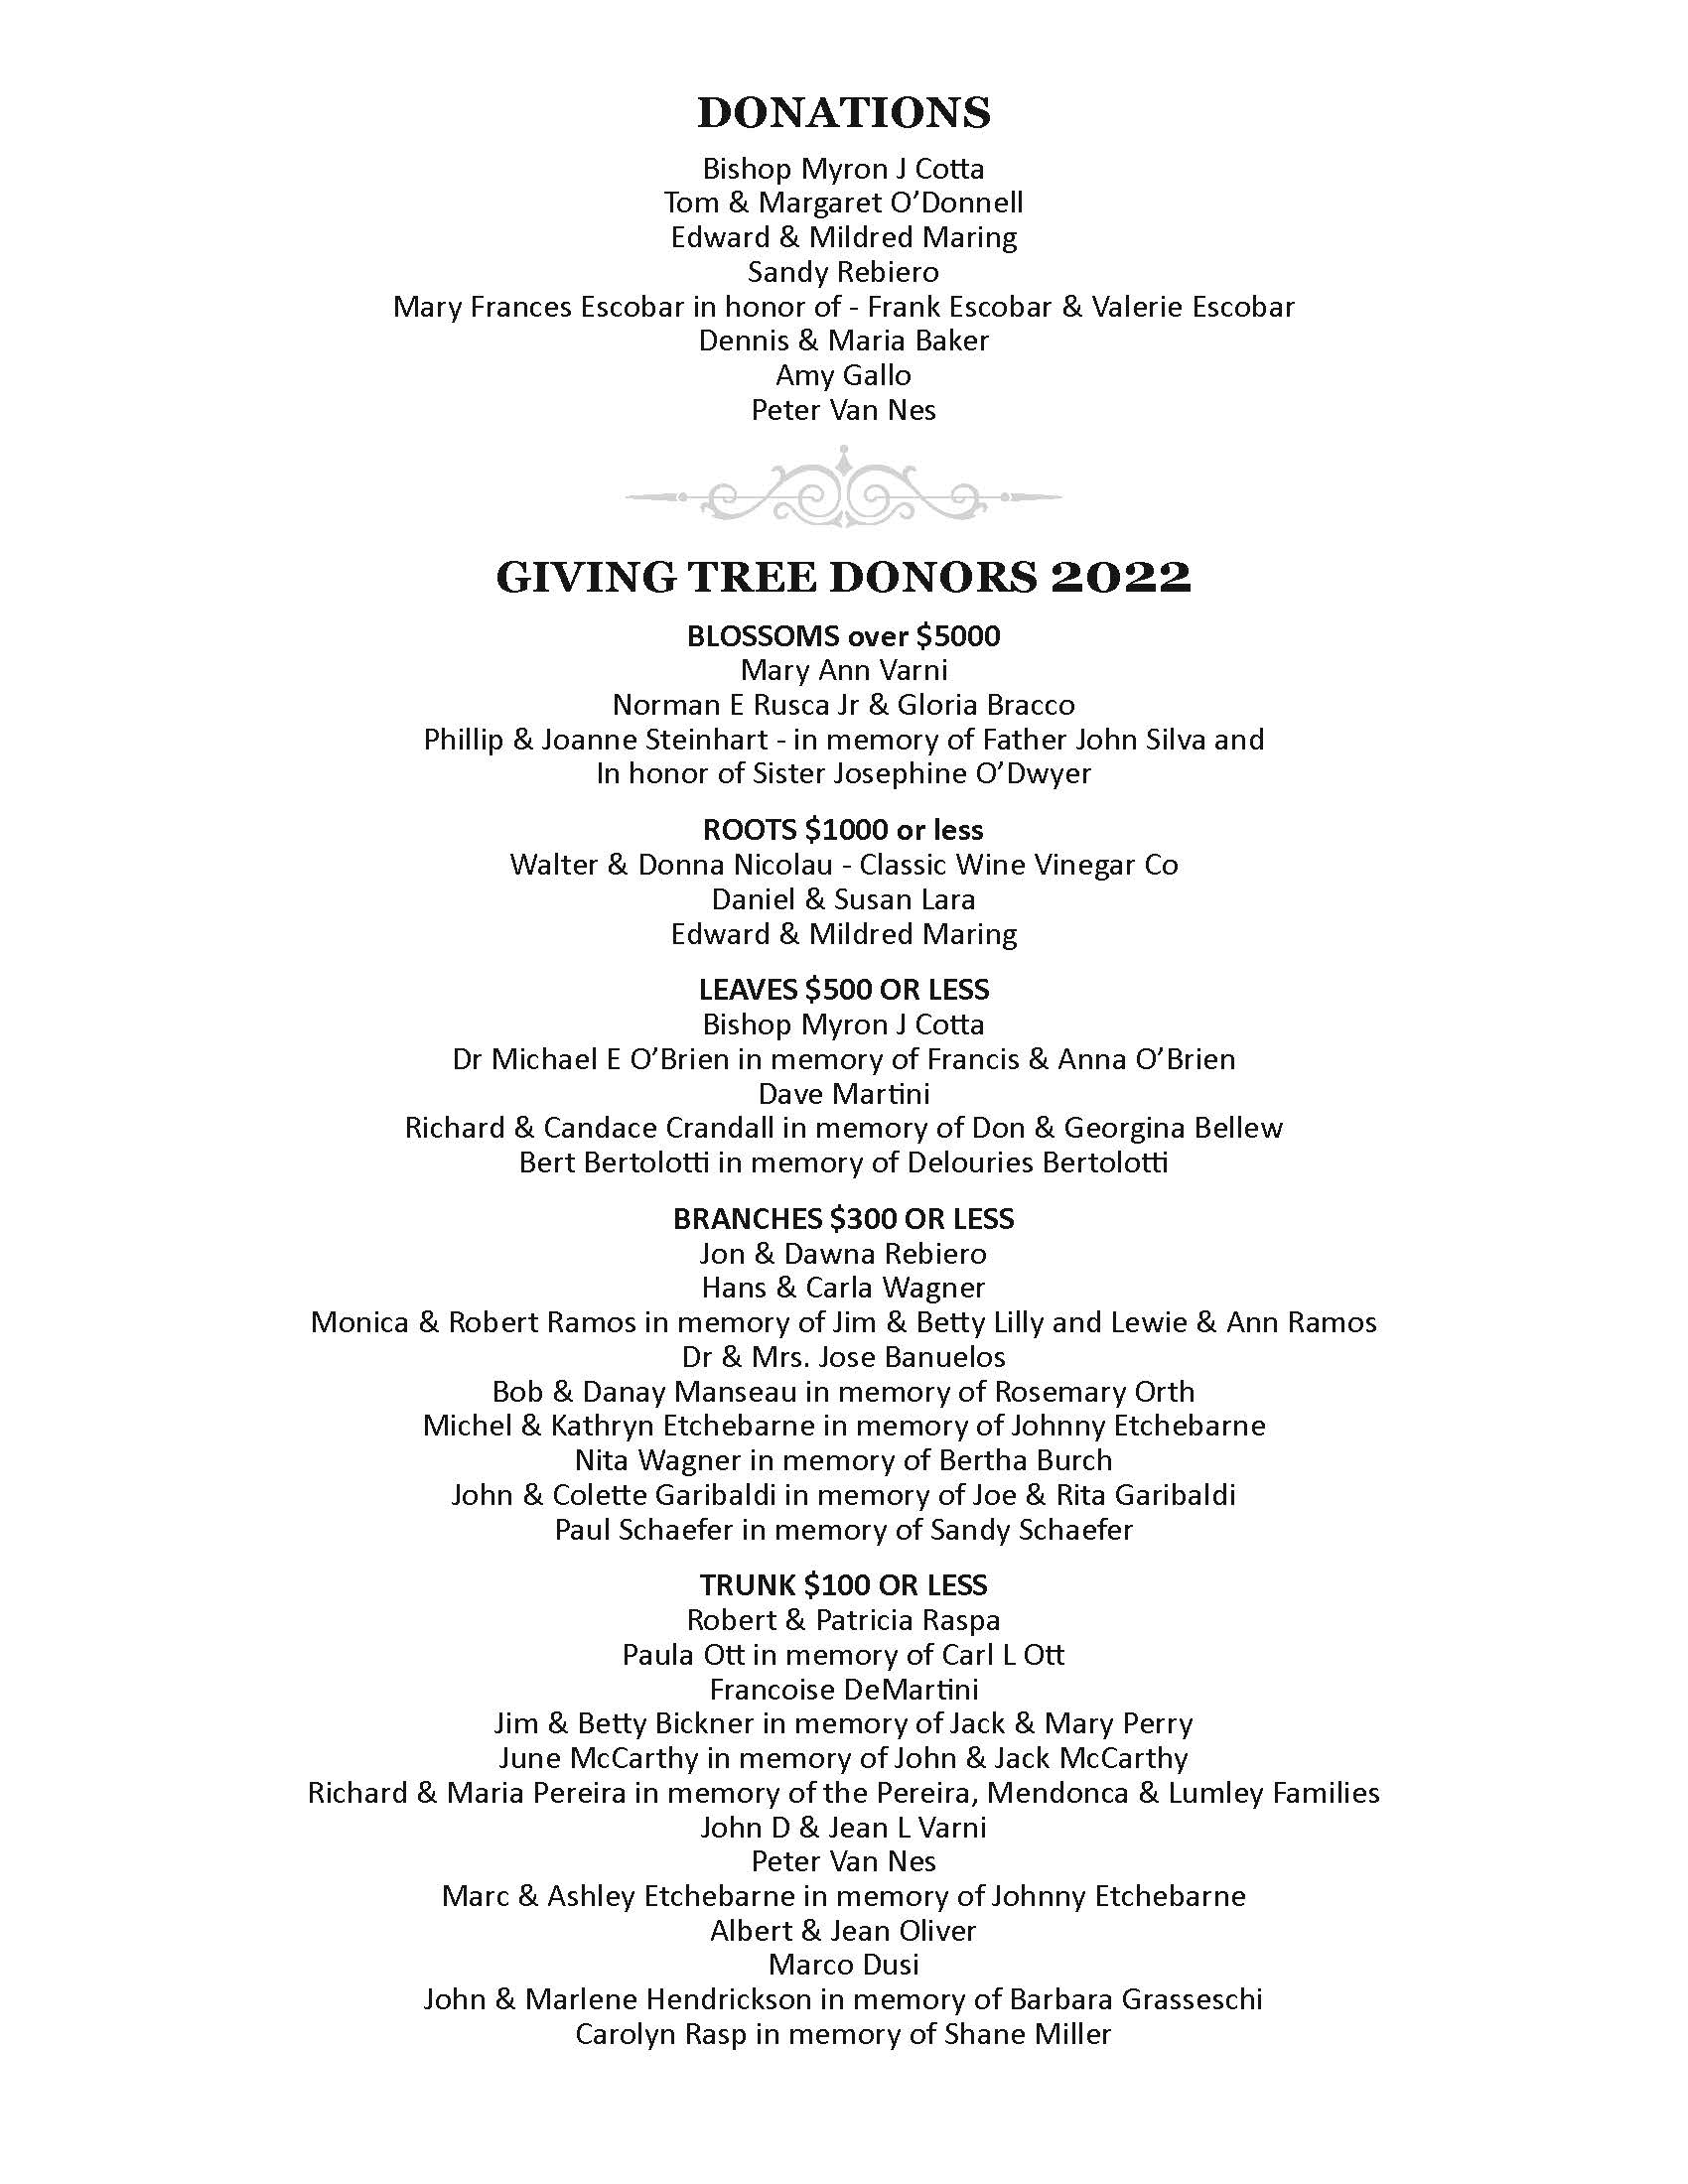 Donations and Giving Tree Donors 2022